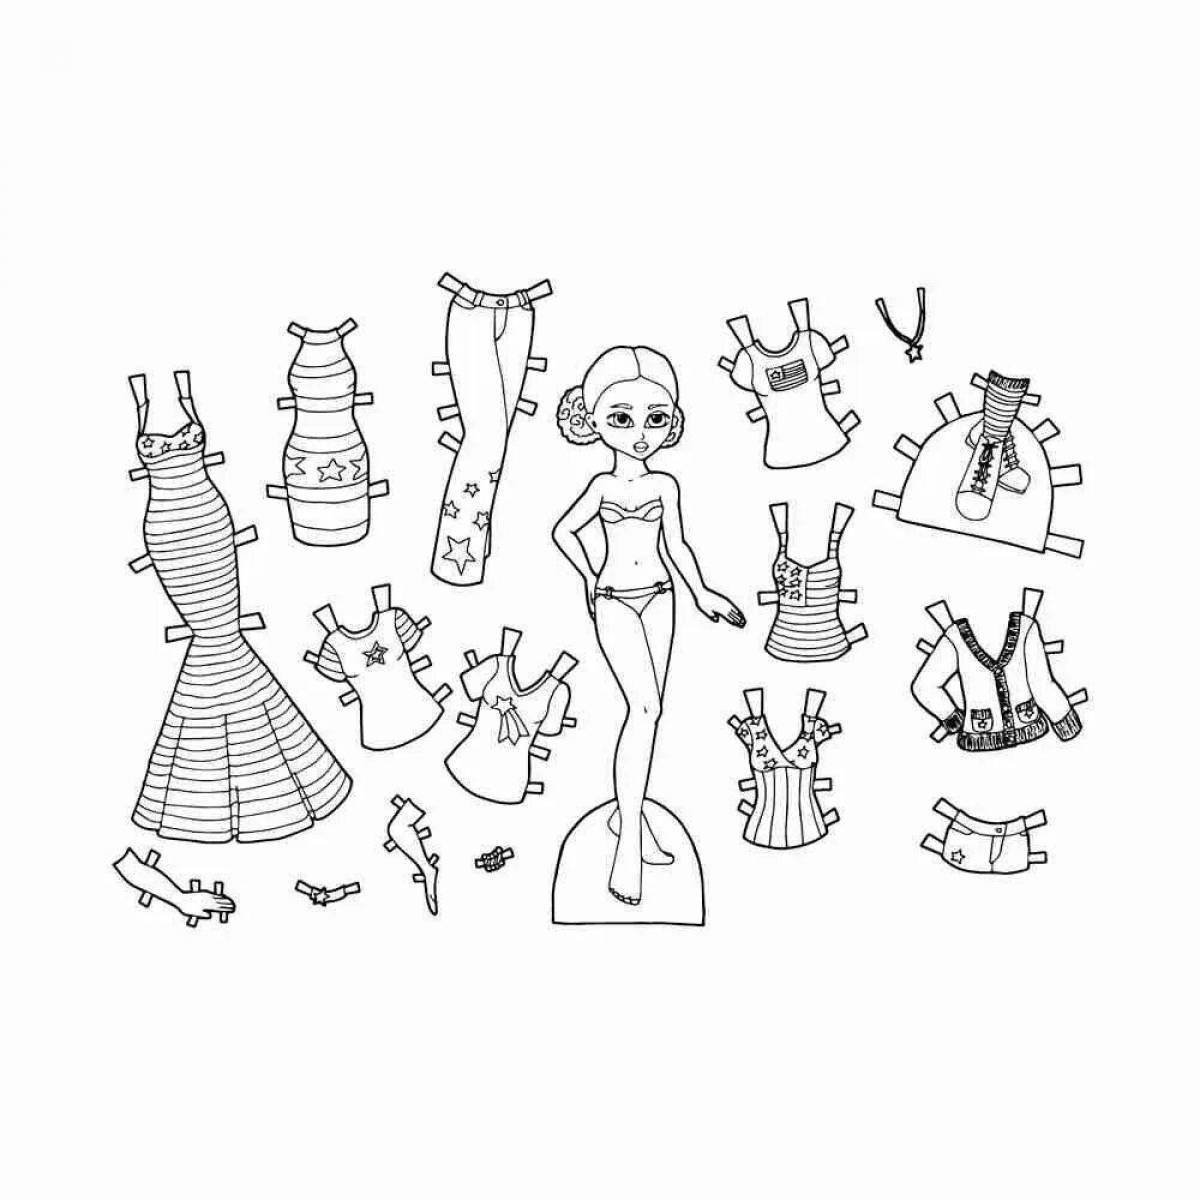 Creative clothing coloring page for ooty lalafanfan